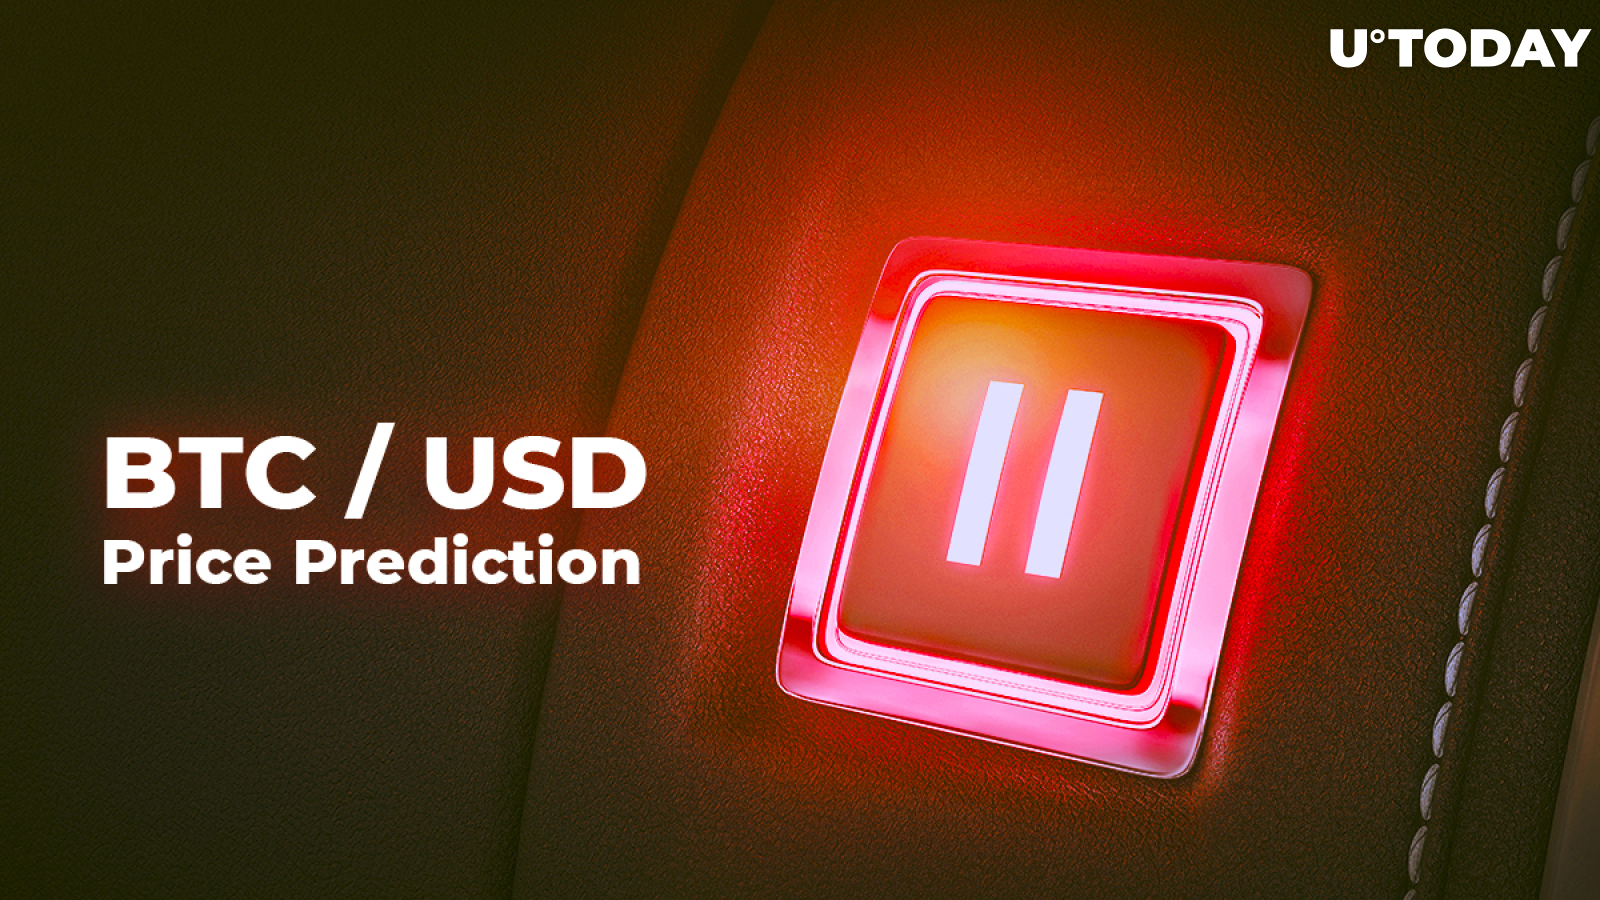 BTC/USD Price Prediction — Are Bulls Making a Pause Before $10,000?